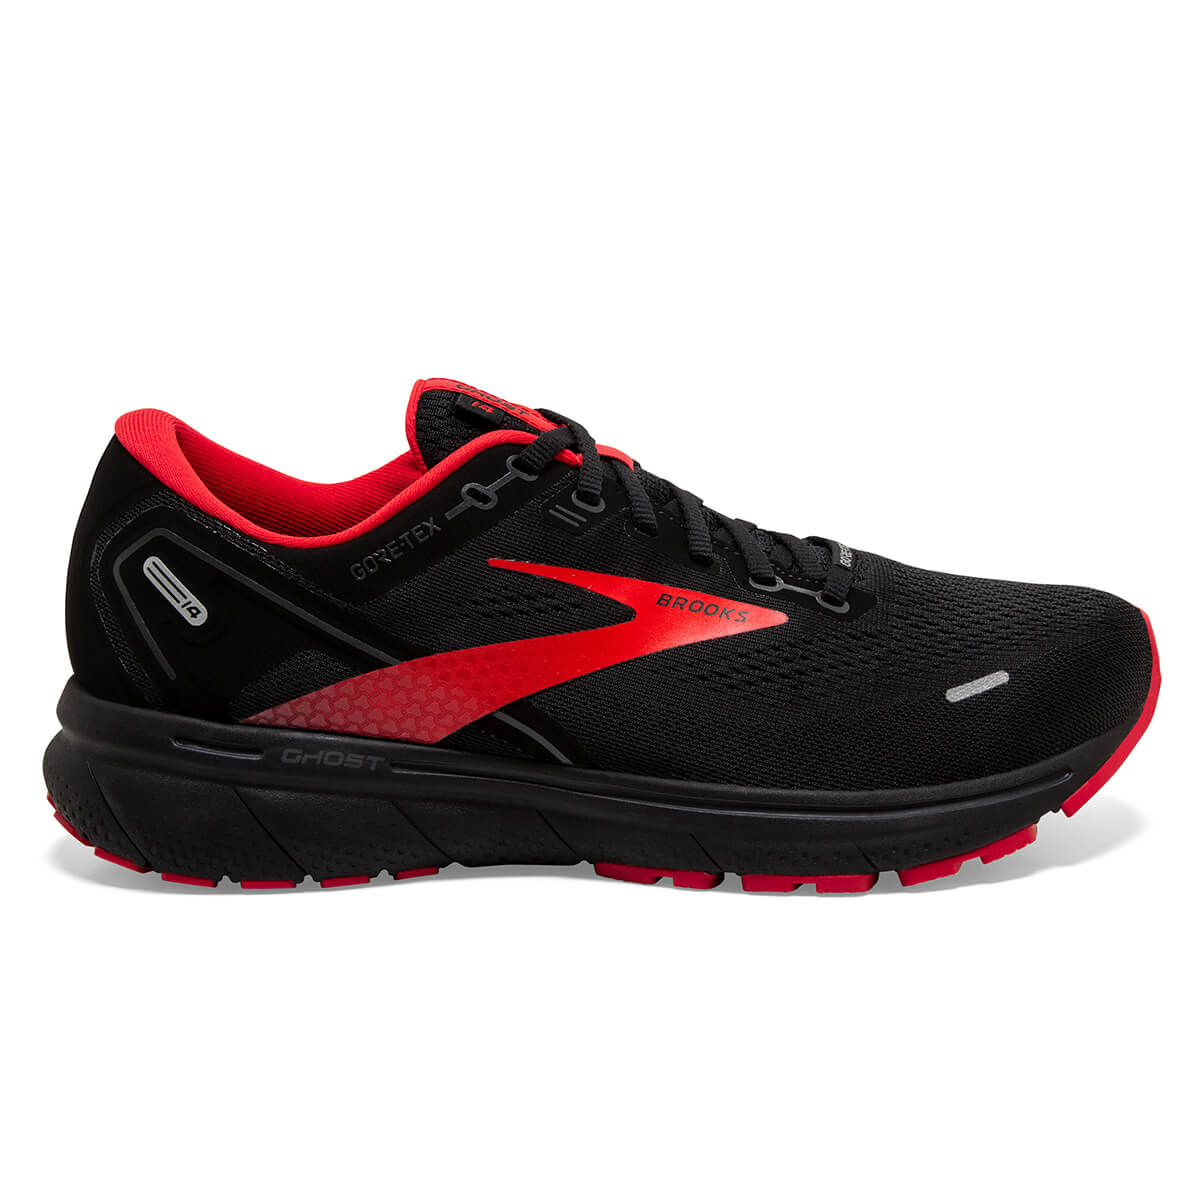 Brooks Ghost 14 GTX Men's Road Running Shoes Black/Blackened Pearl/High Risk Red US 6 